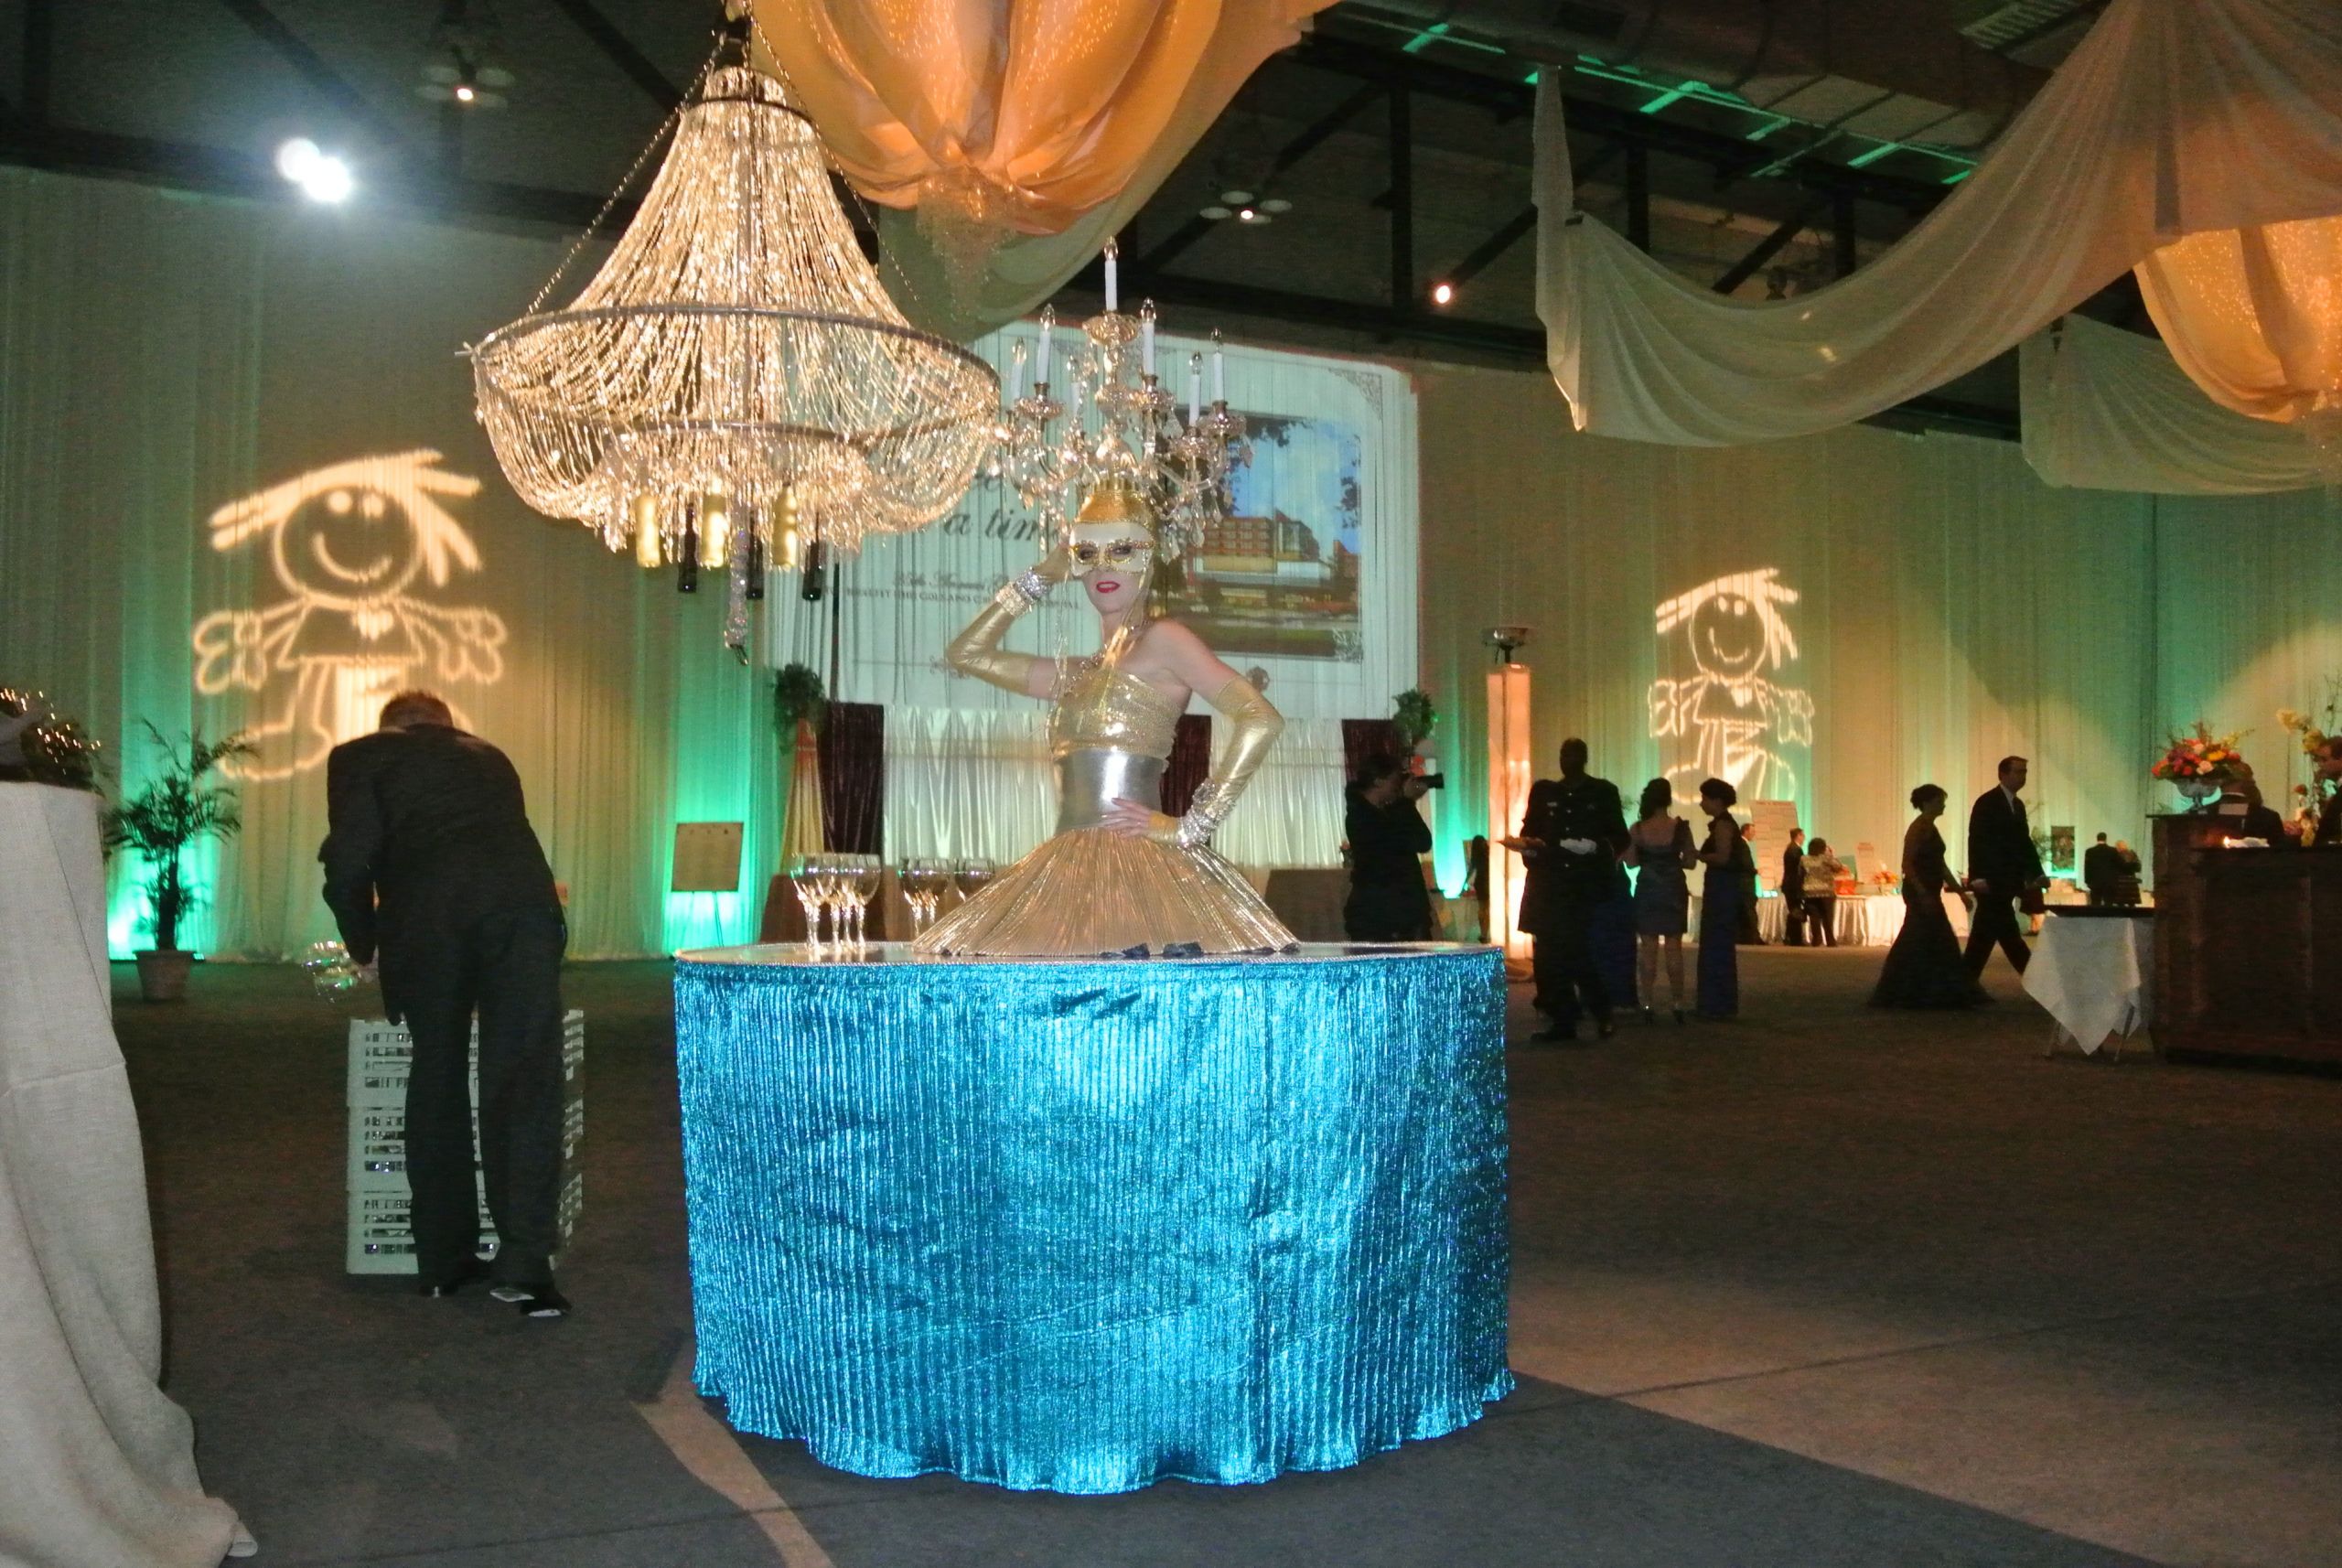 Corporate Holiday Party Entertainment Ideas
 Last Minute Planning Holiday Party Ideas event